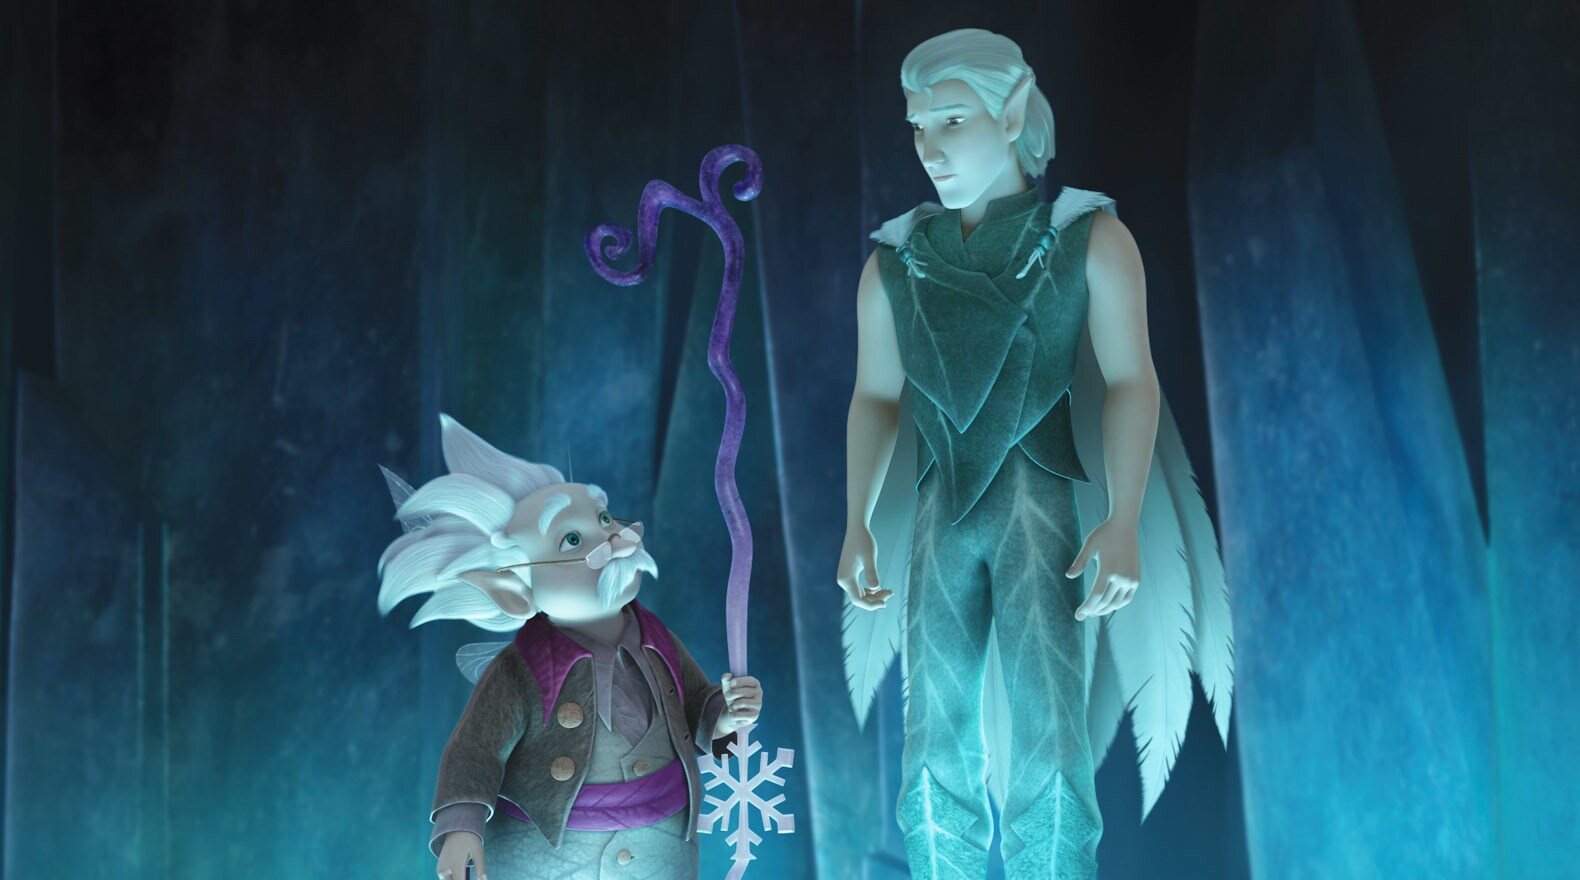 The leader of the Winter Fairies consults with Dewey about important decisions.